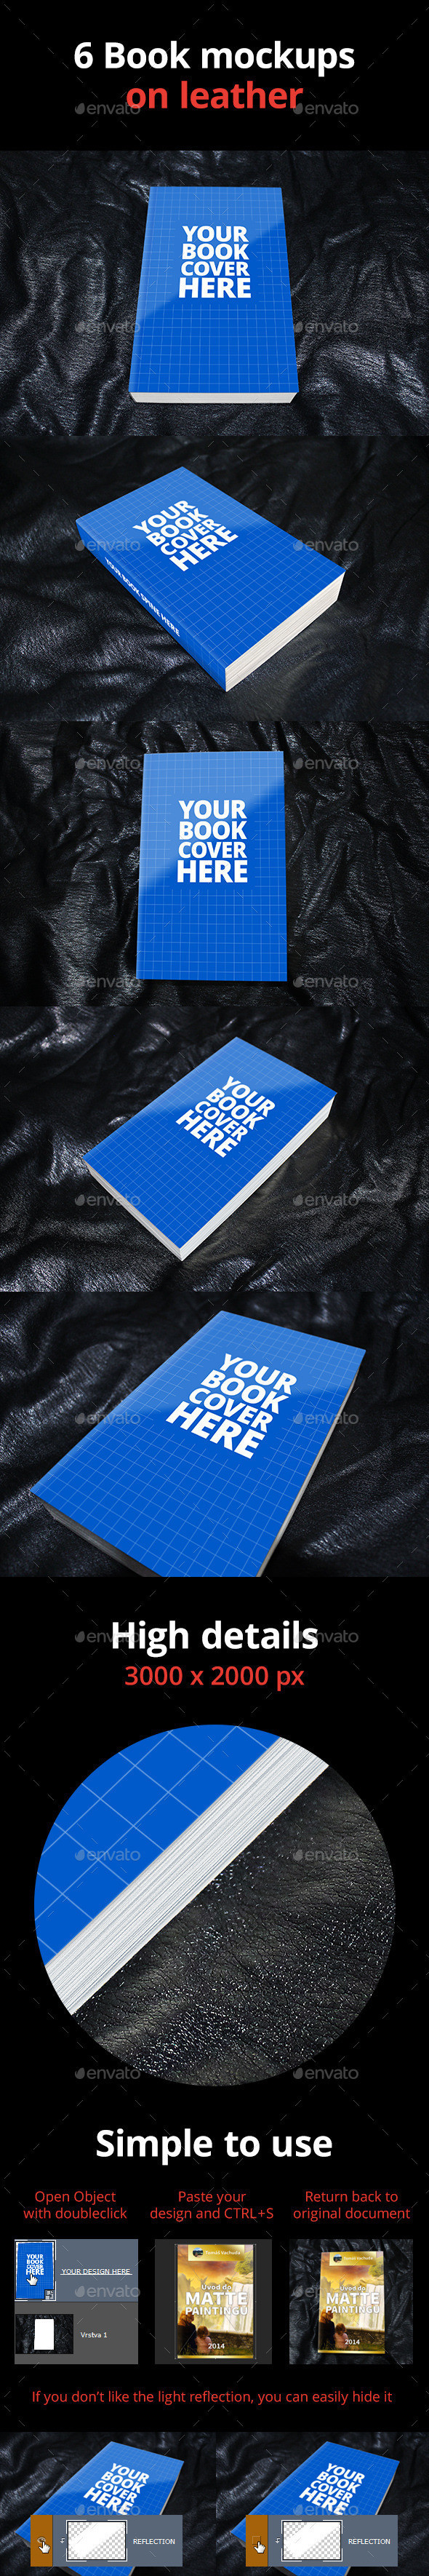 5 book mockups on leather preview